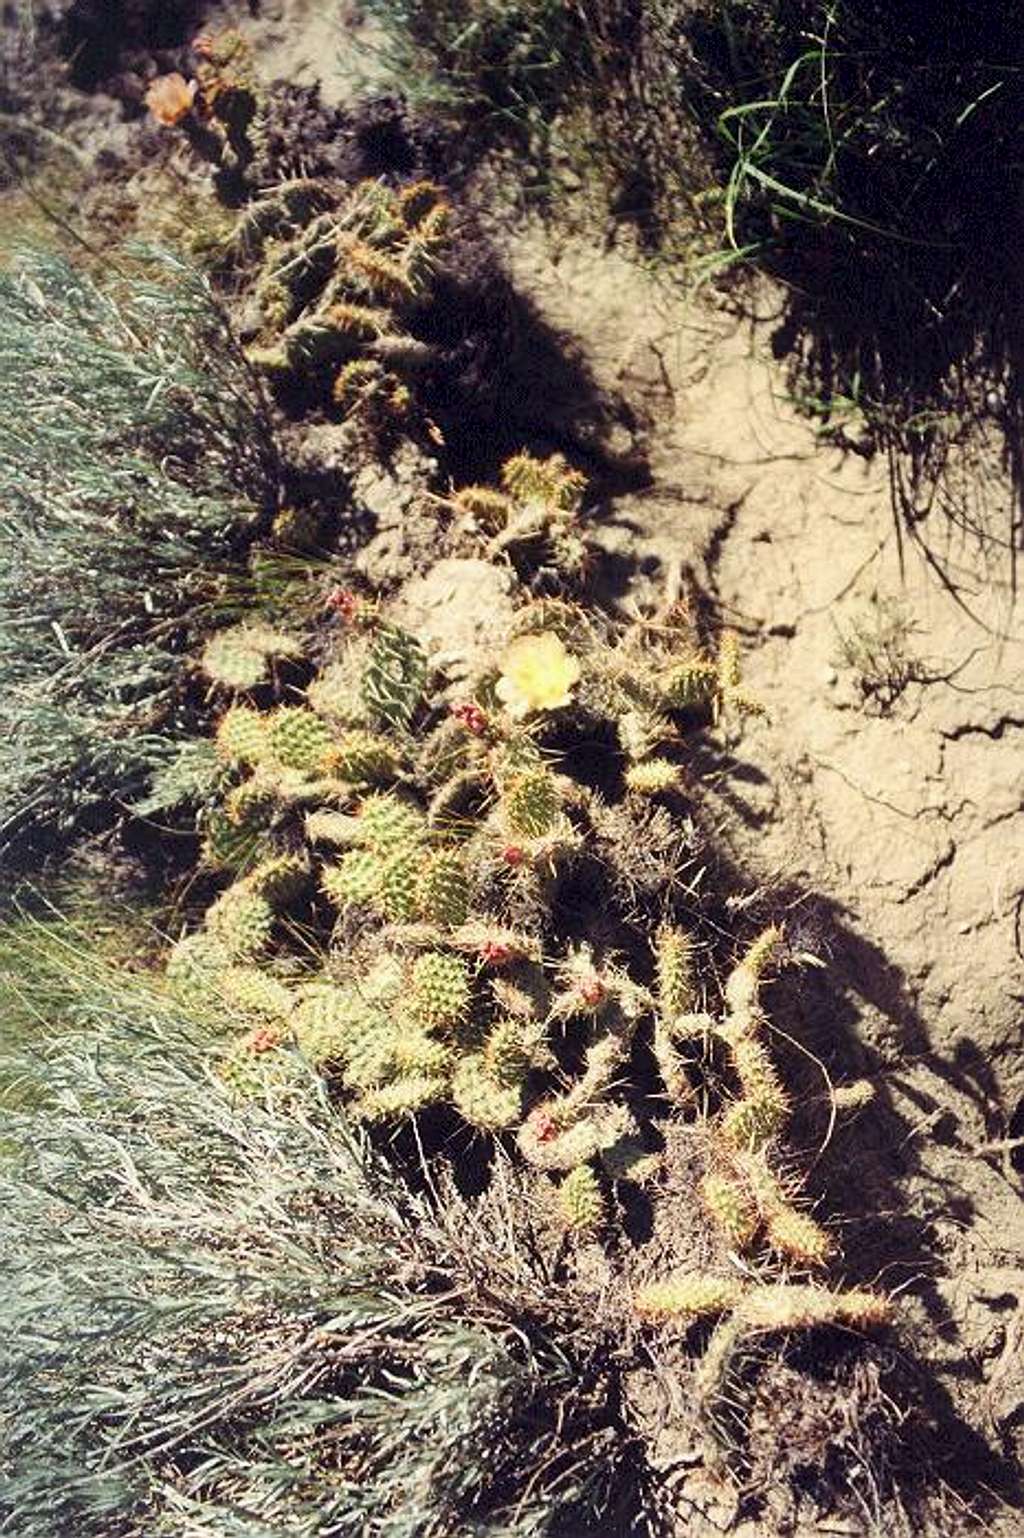 A lurking cactus patch in a...